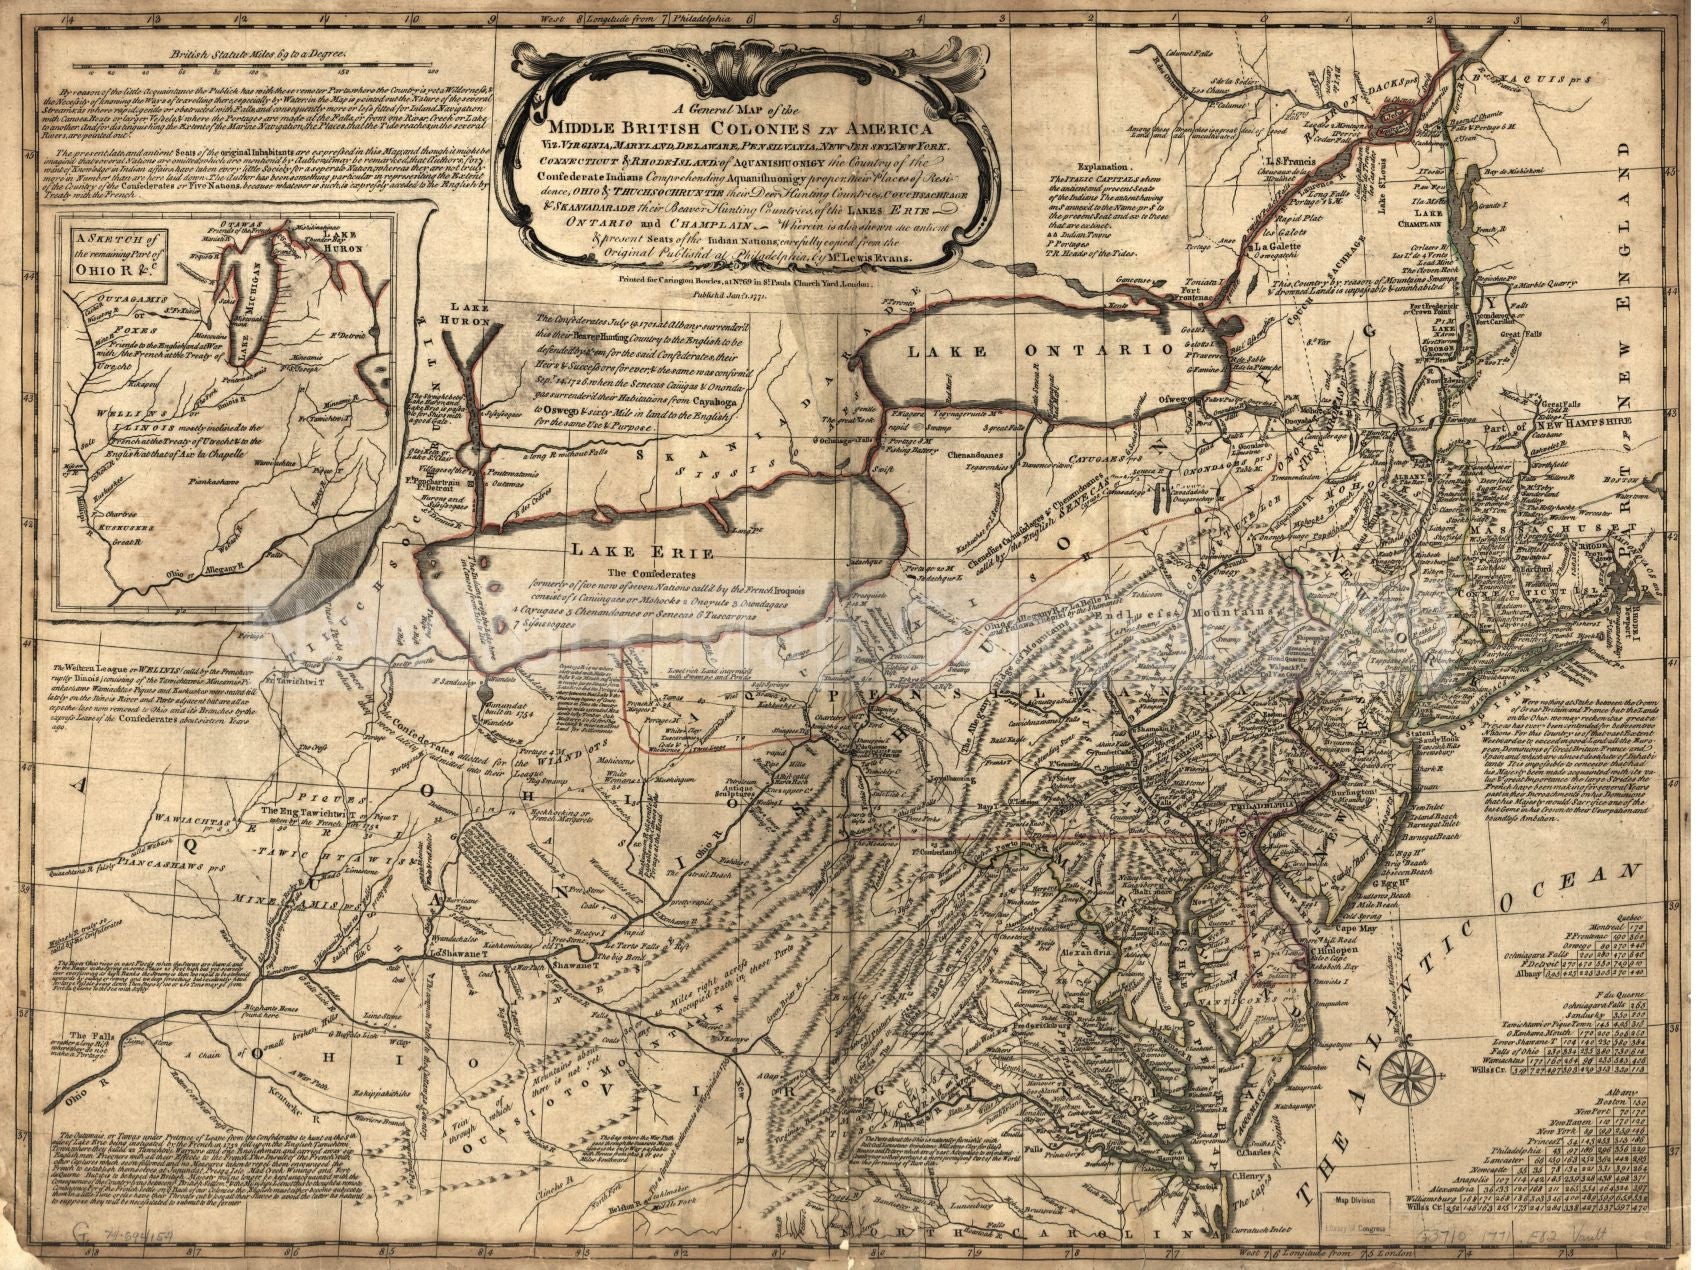 1771 Map|Title: A general map of the middle British colonies in America, viz. Vi - New York Map Company